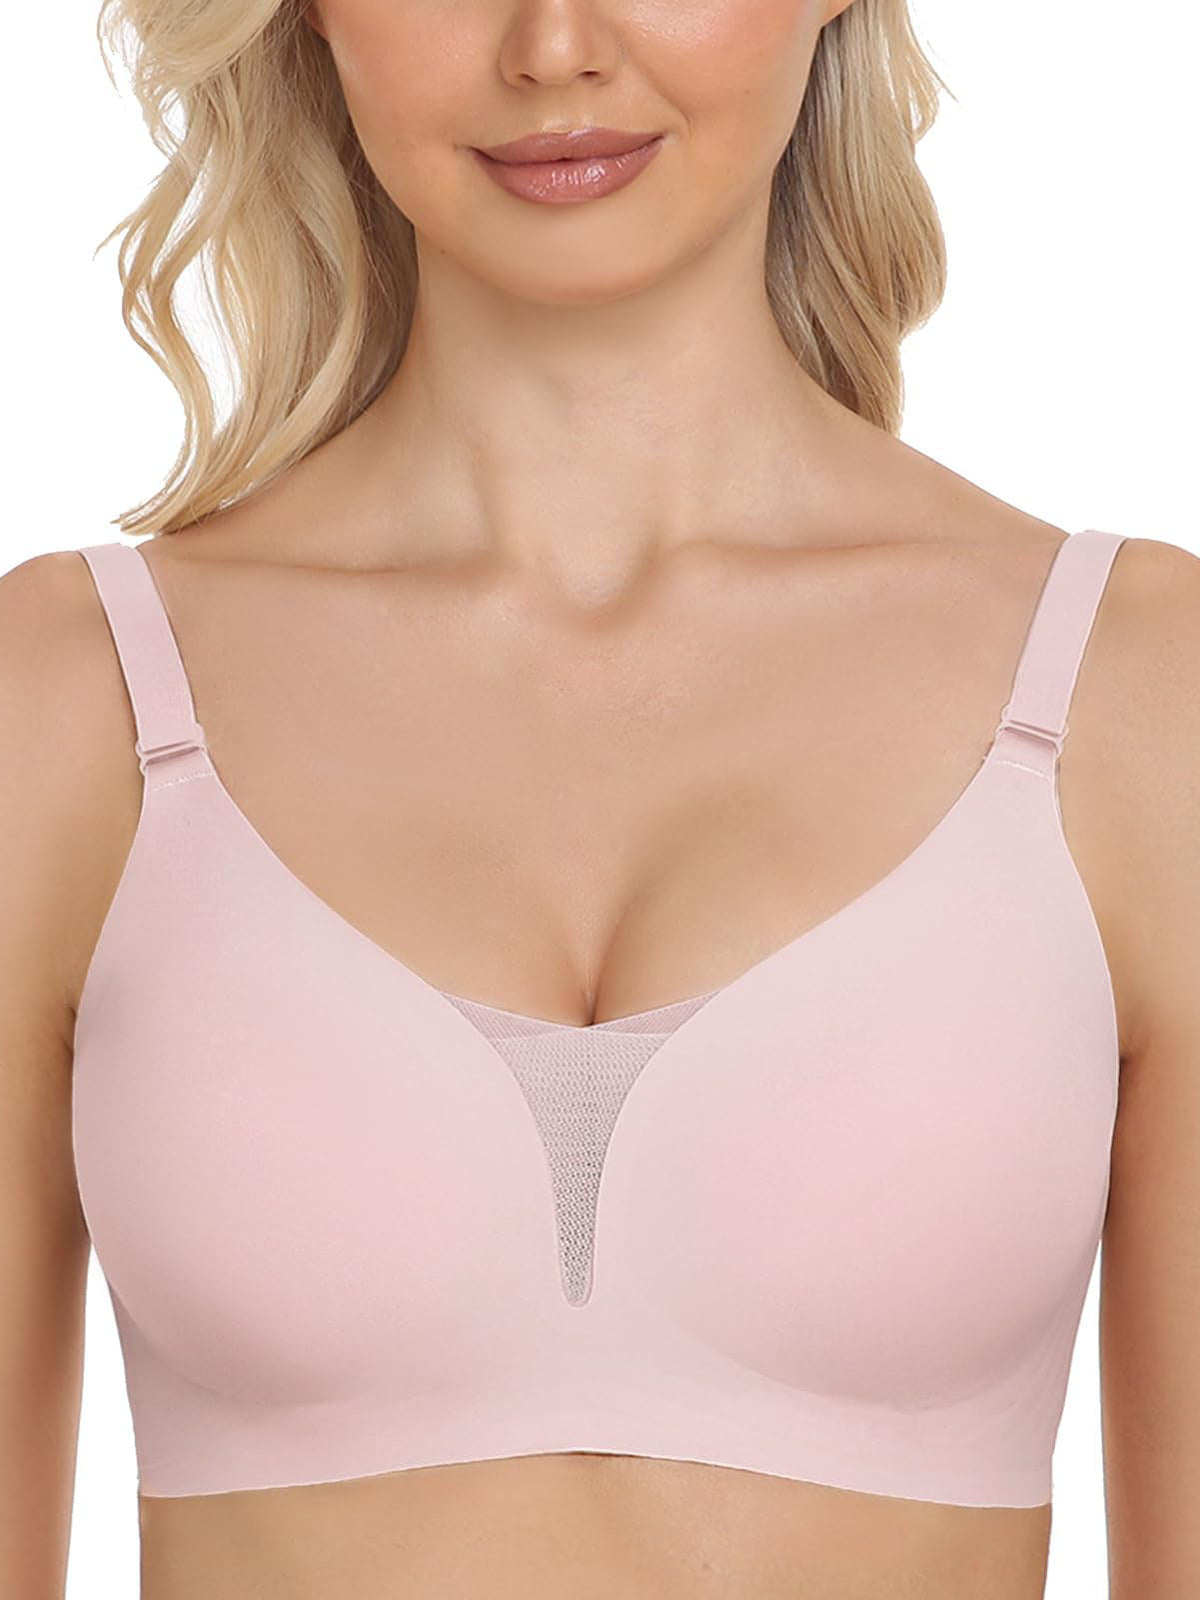 Mesh Bras for Women No Underwire Wireless Comfort Lift Push Up Bralettes for Women with Support and Bra Pink